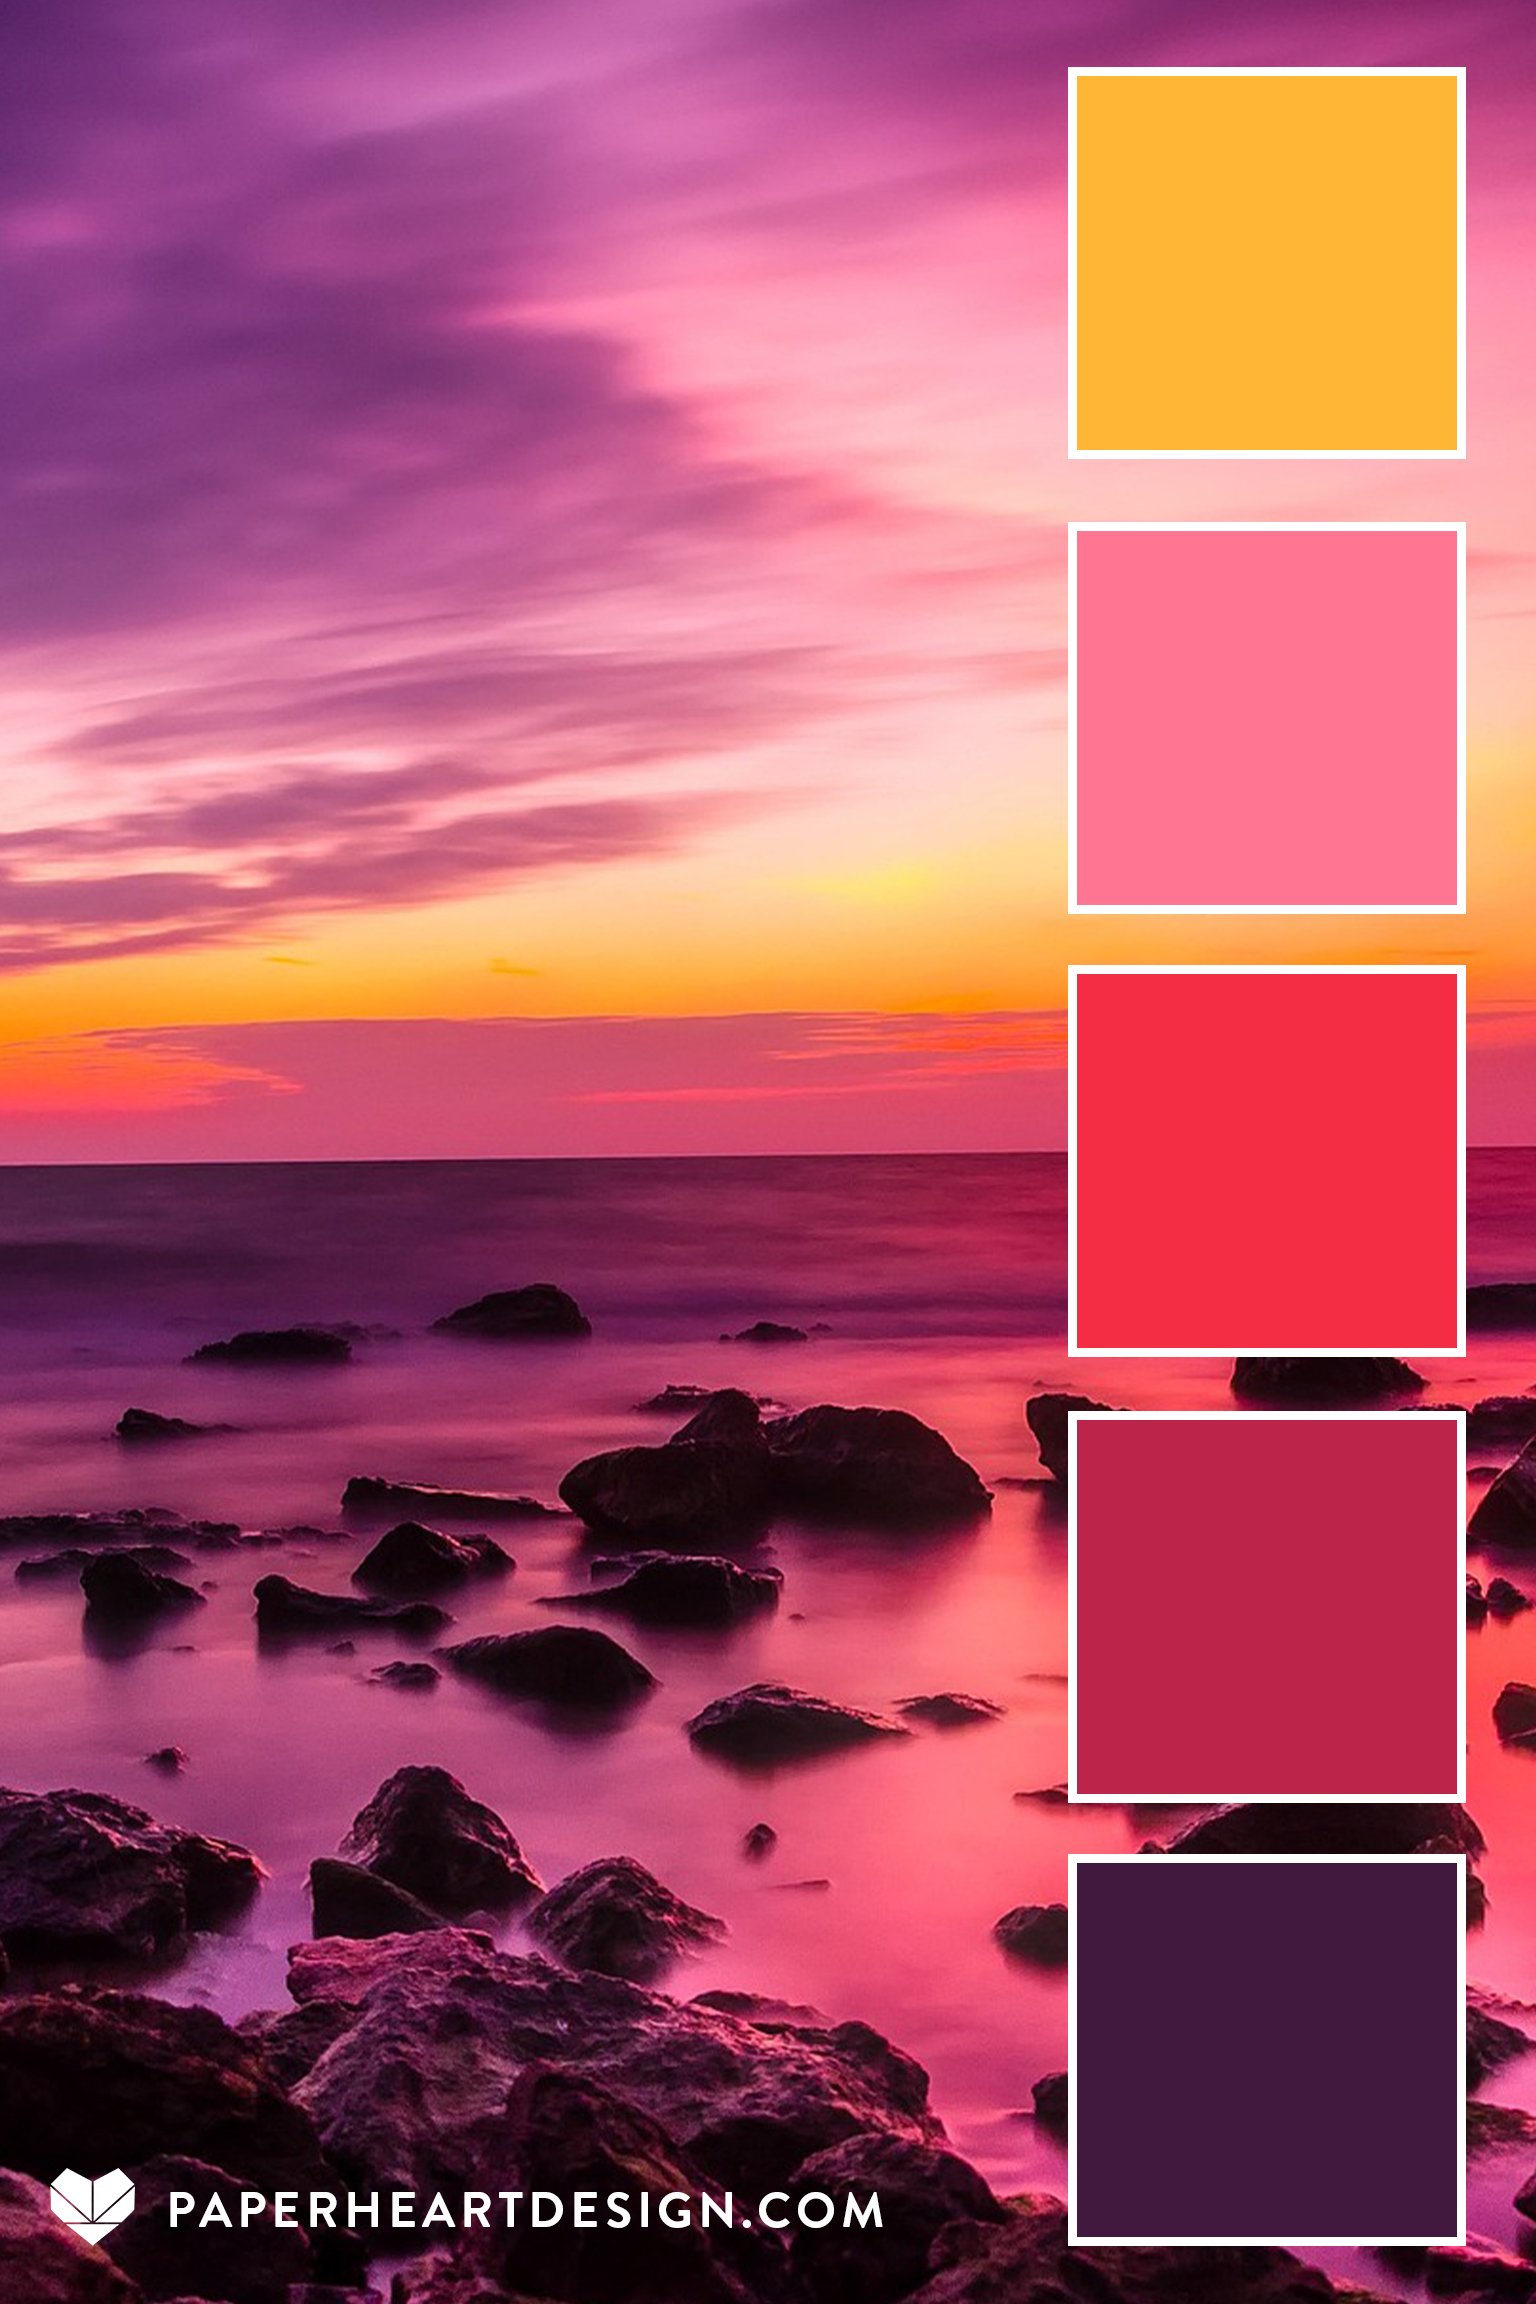 The 2023 Color of the Year is Viva Magenta! - Goodnet